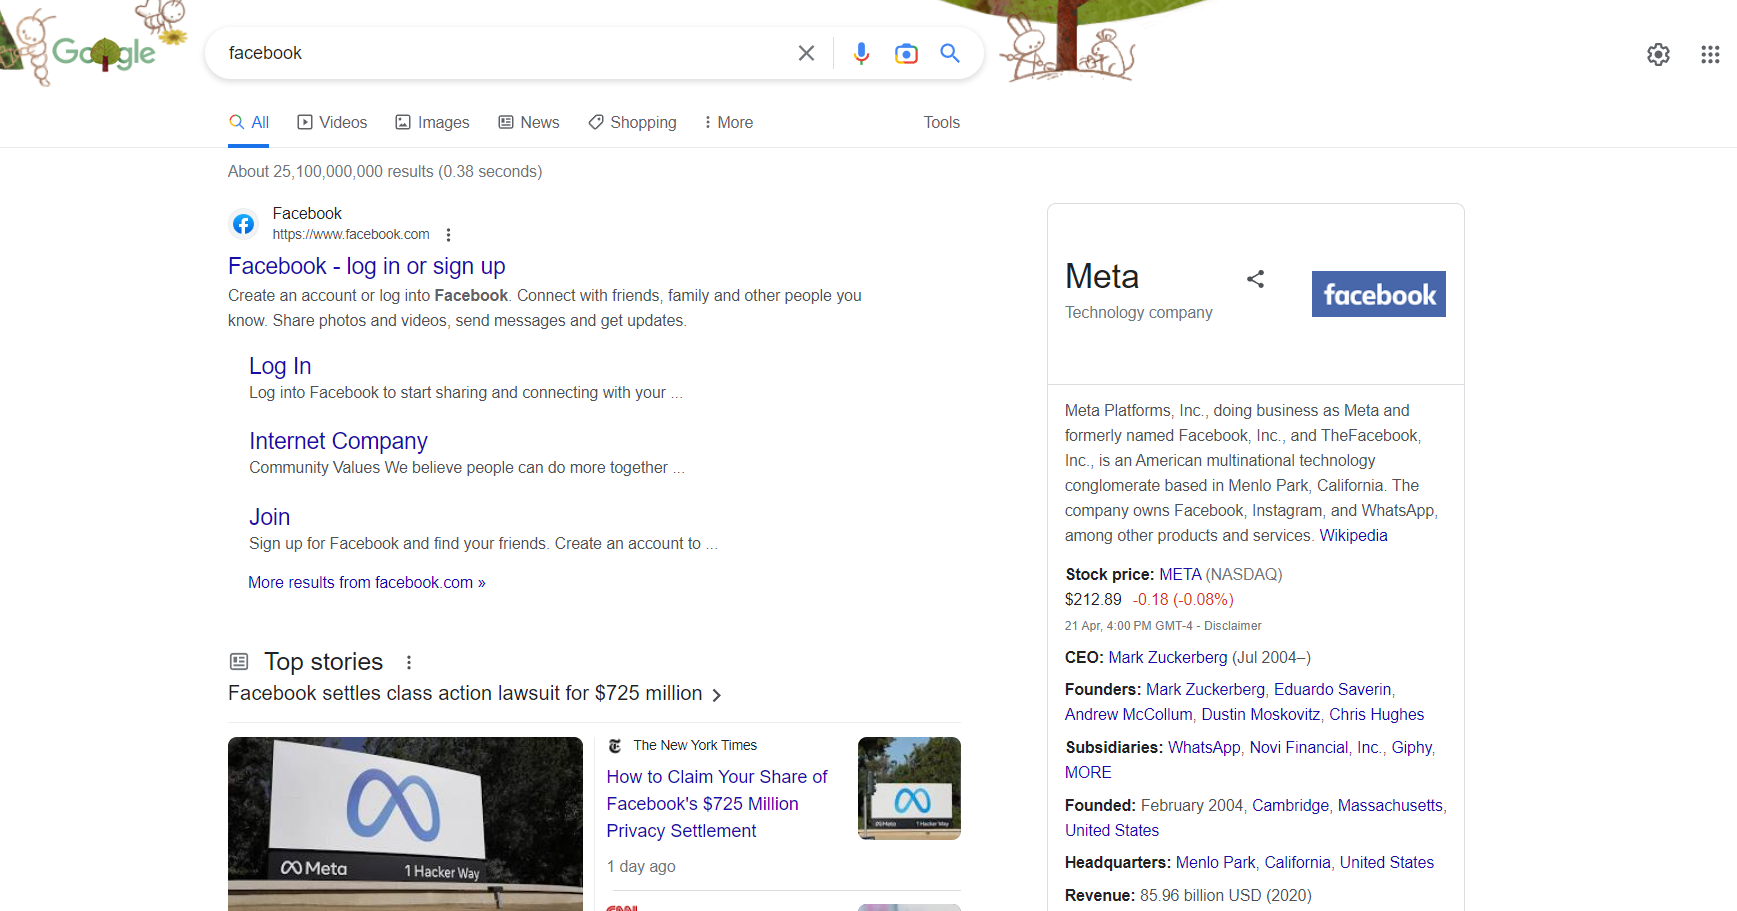 Google Search Engine Result Page